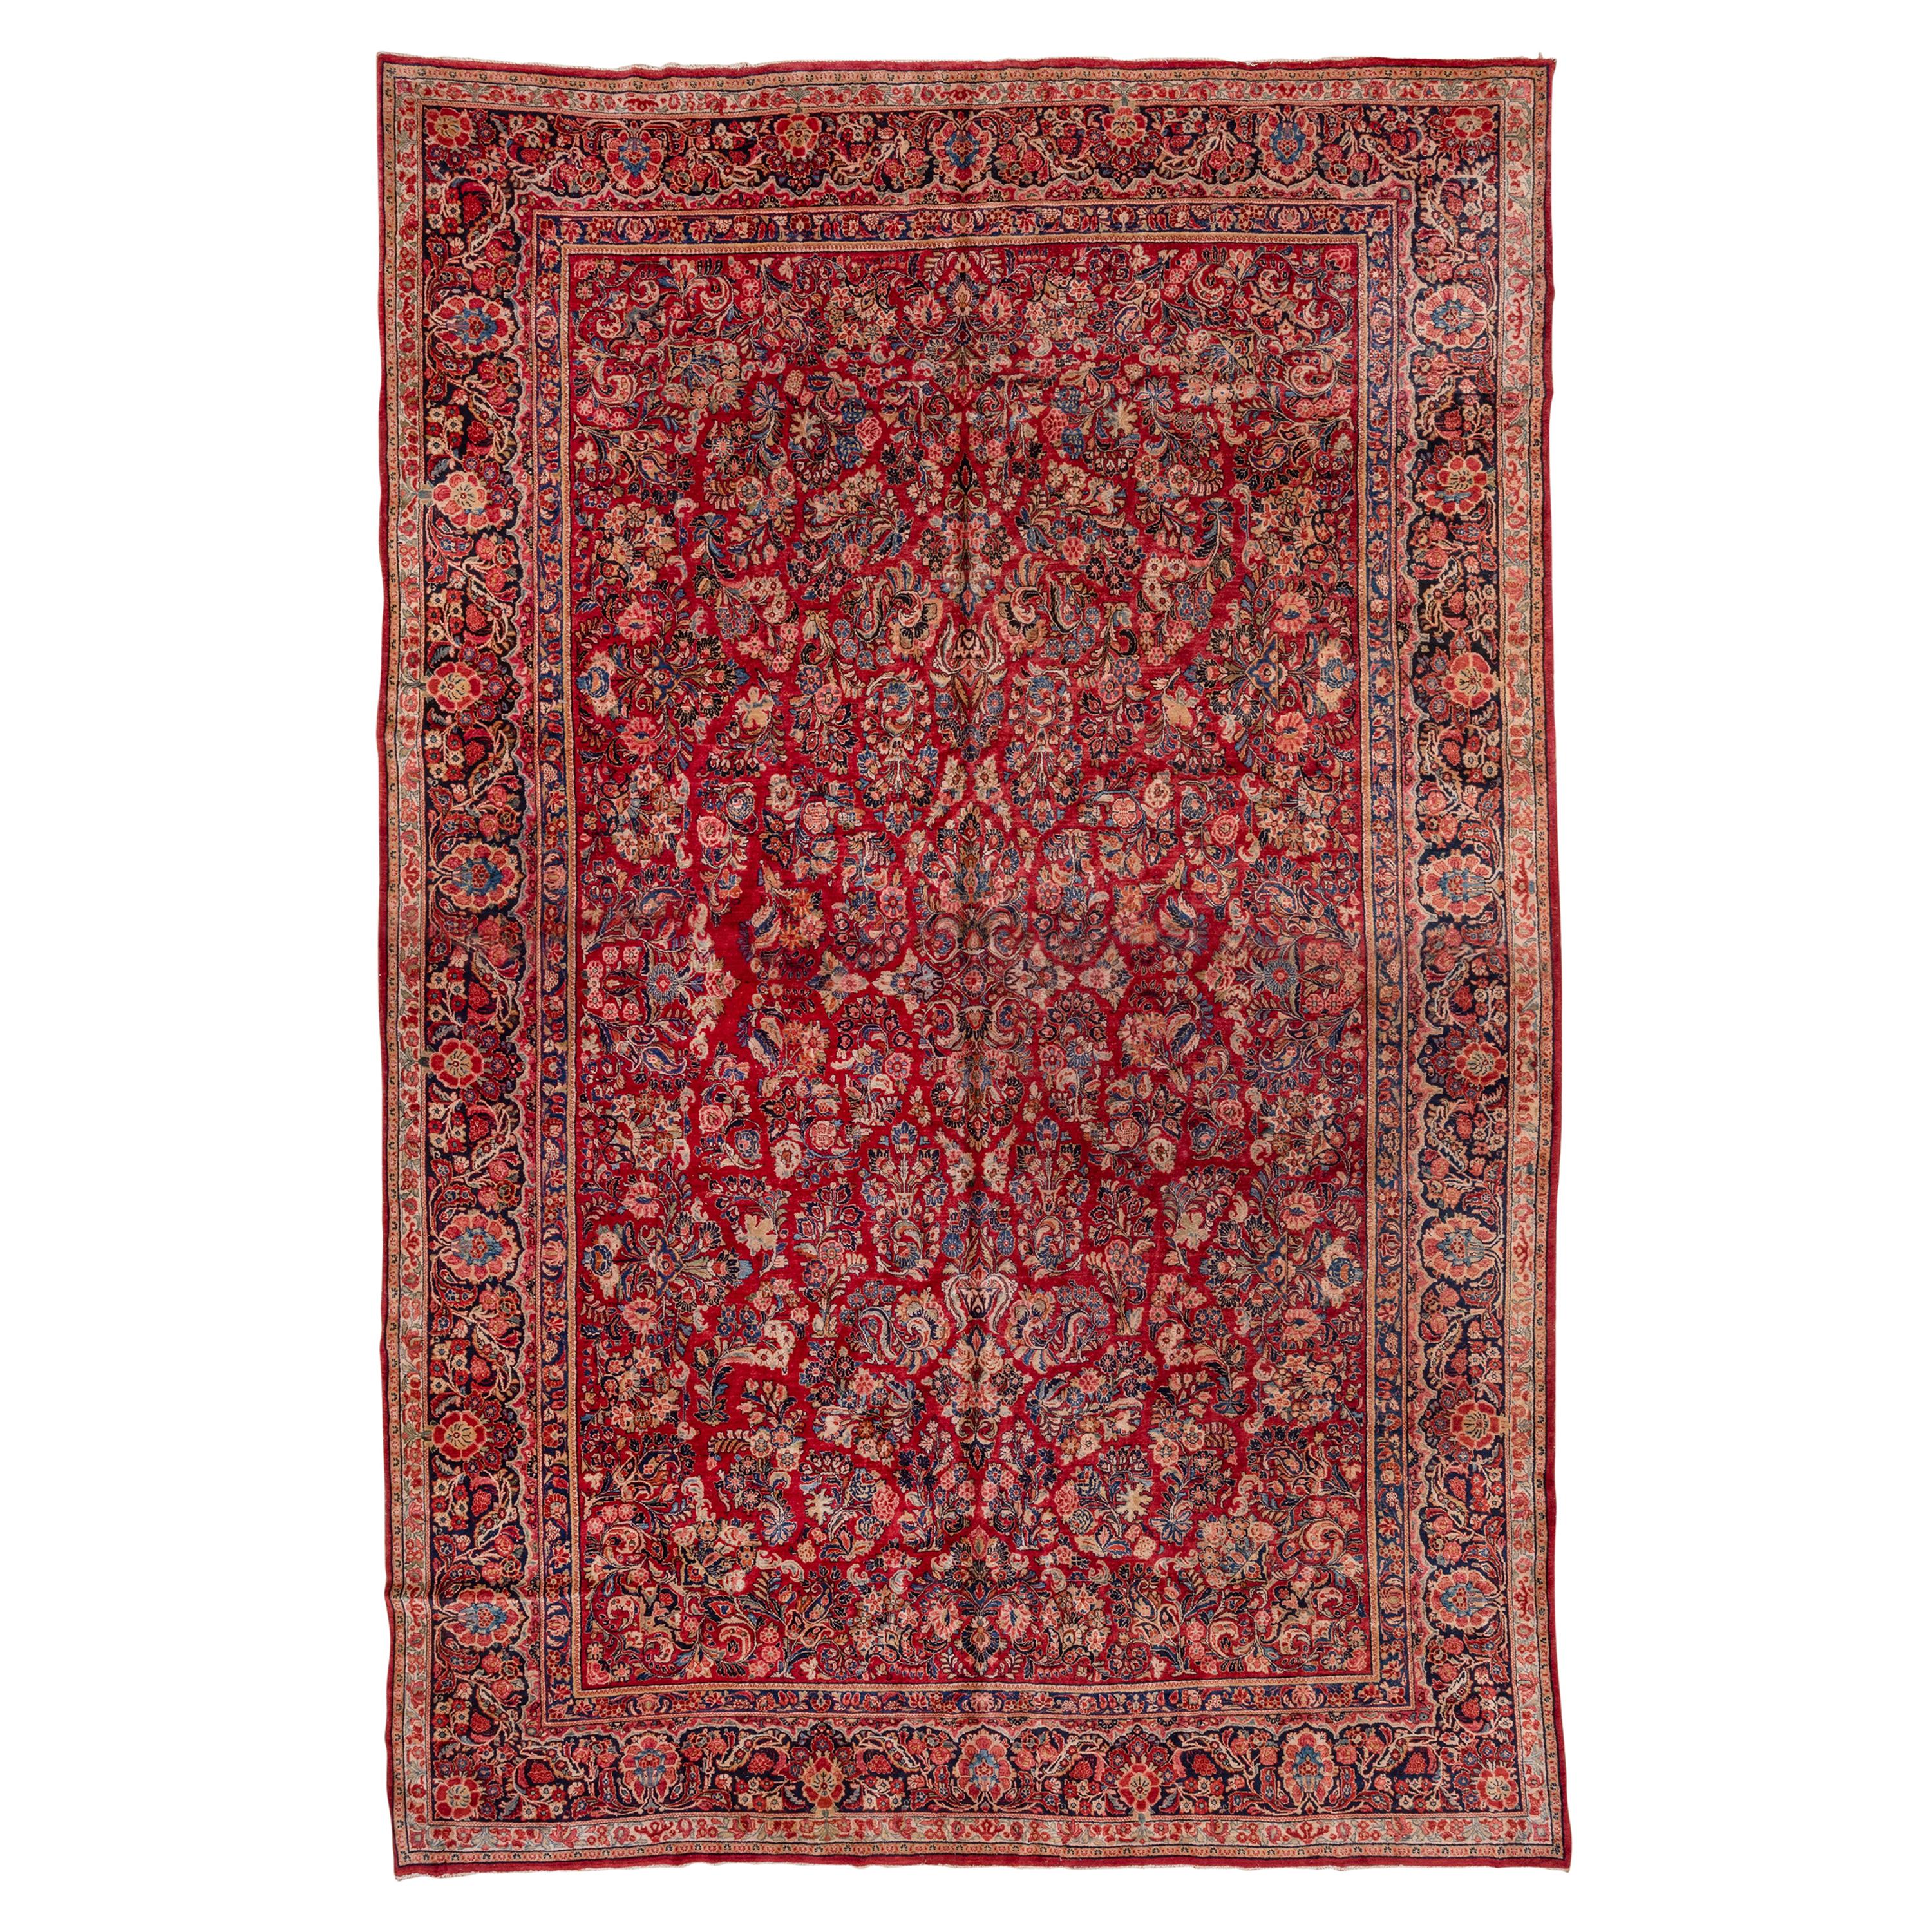 Antique Red Persian Sarouk Rug, All-Over Field, Silky Pile